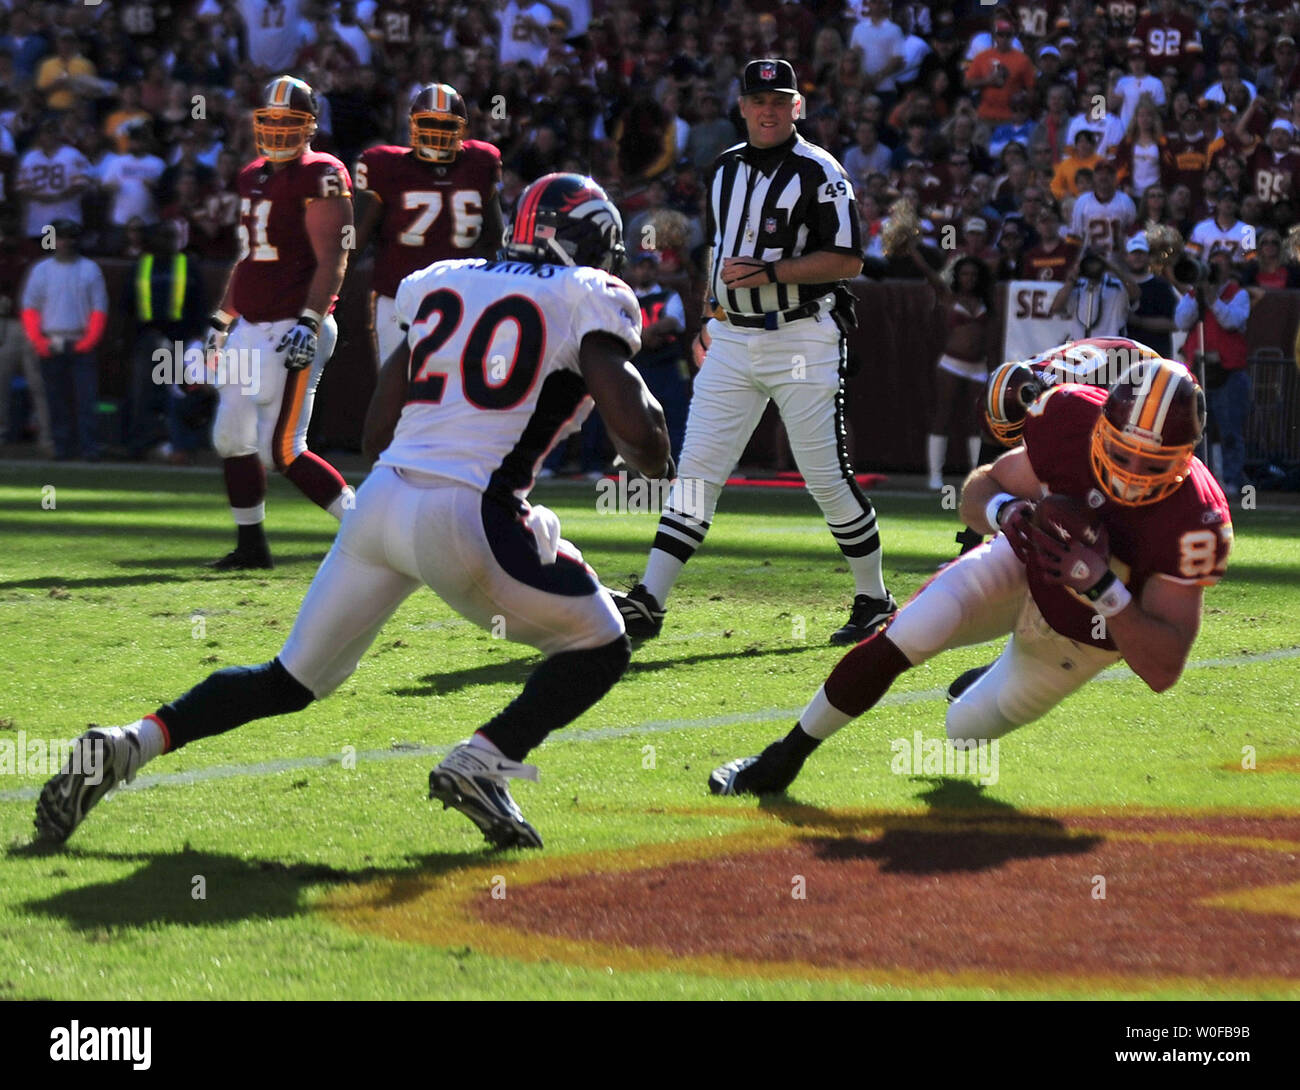 Washington Redskins Todd Yoder (87) brings in a 2-yard touchdwon reception against Denver Broncos' Brian Dawkins (20) during the first quarter at FedEx Field in Landover, Maryland on November 15, 2009.   UPI/Kevin Dietsch Stock Photo